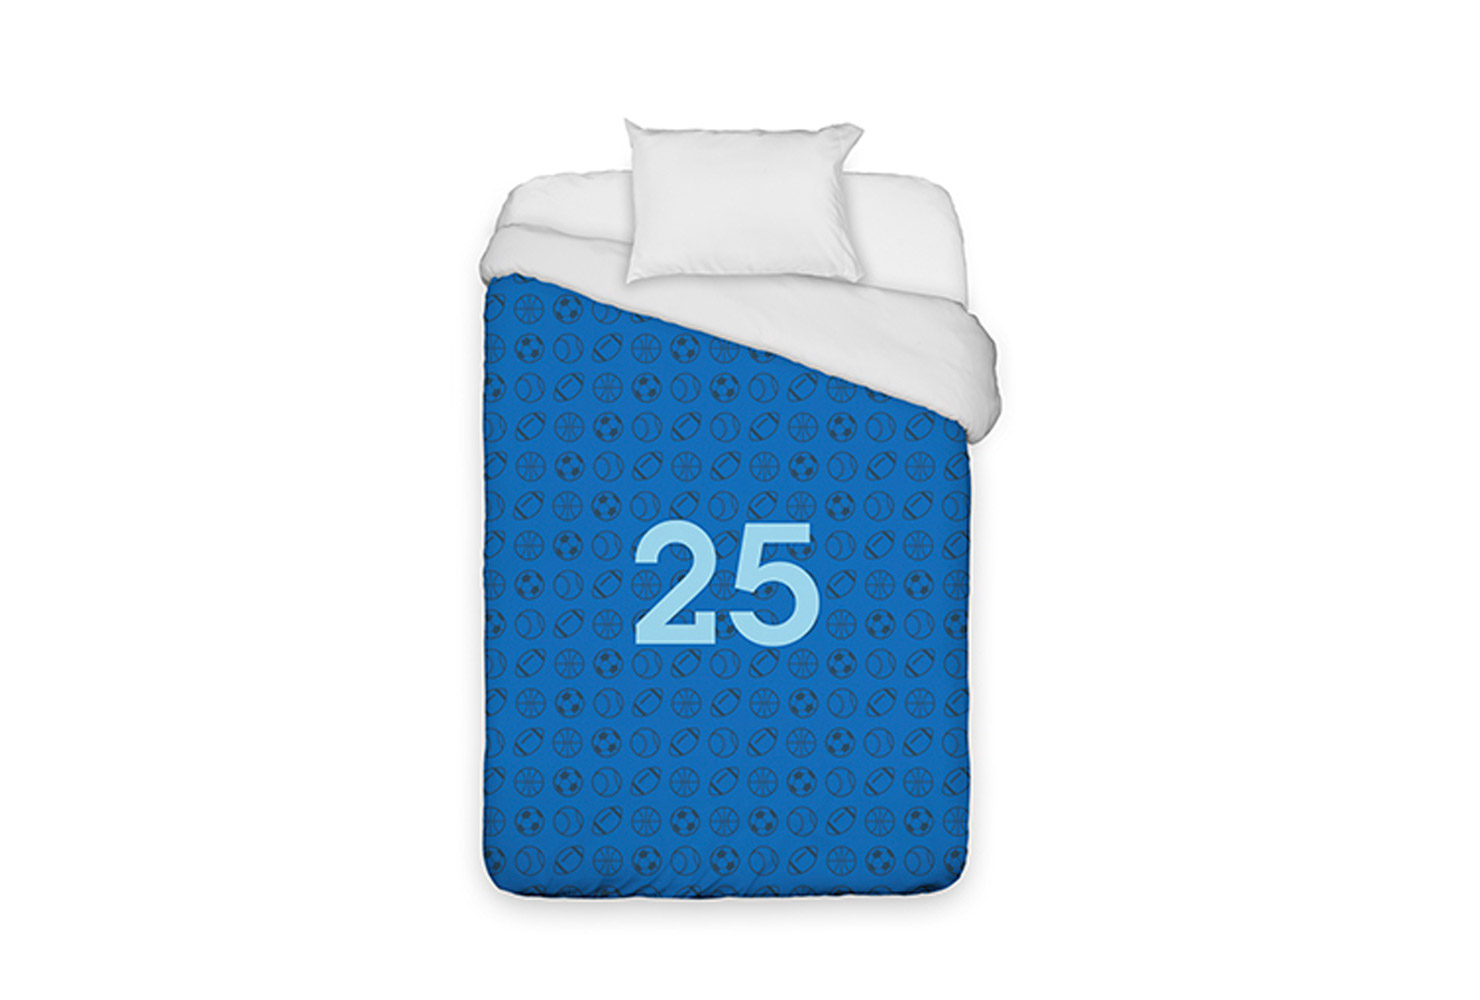 Blue bedspread decorated with balls and jersey number.